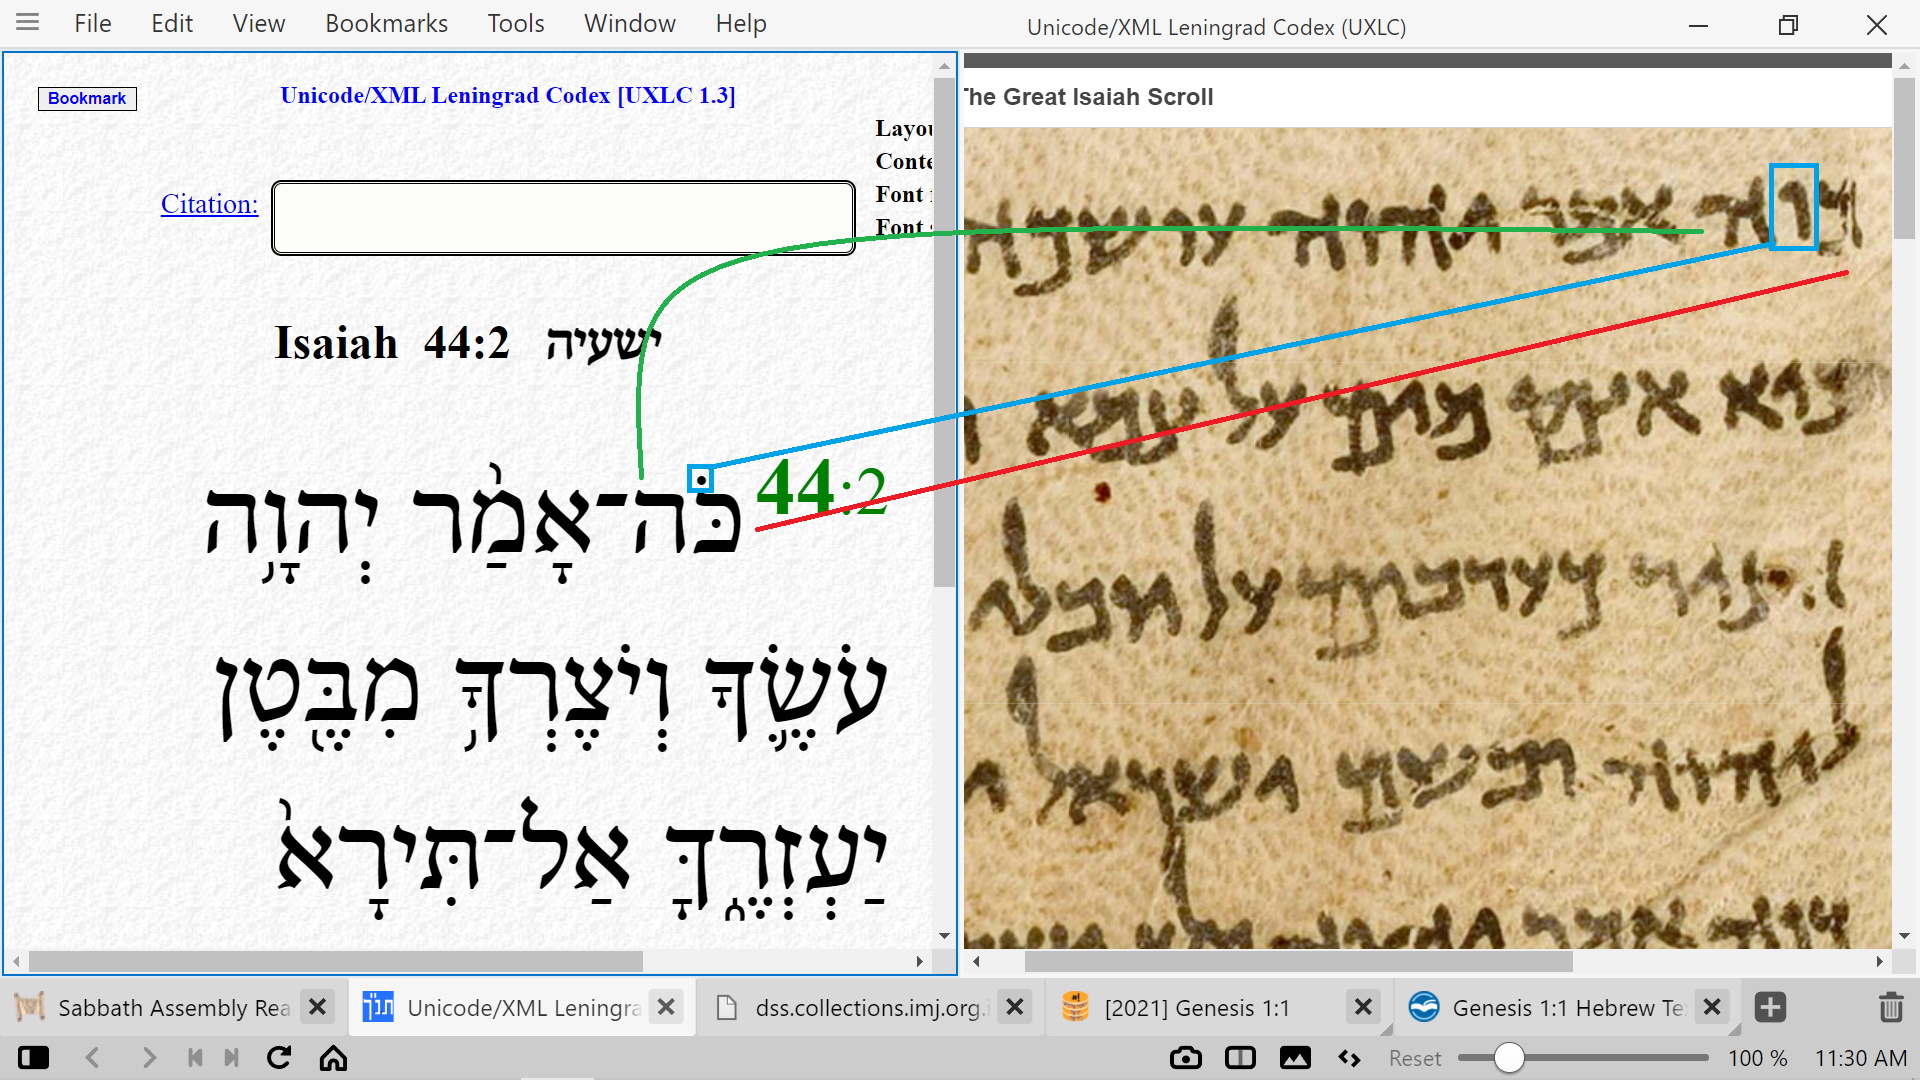 Isaiah 44 verse 2 in the Dead Sea Scrolls compared to the Masoretic Hebrew - Pic 1